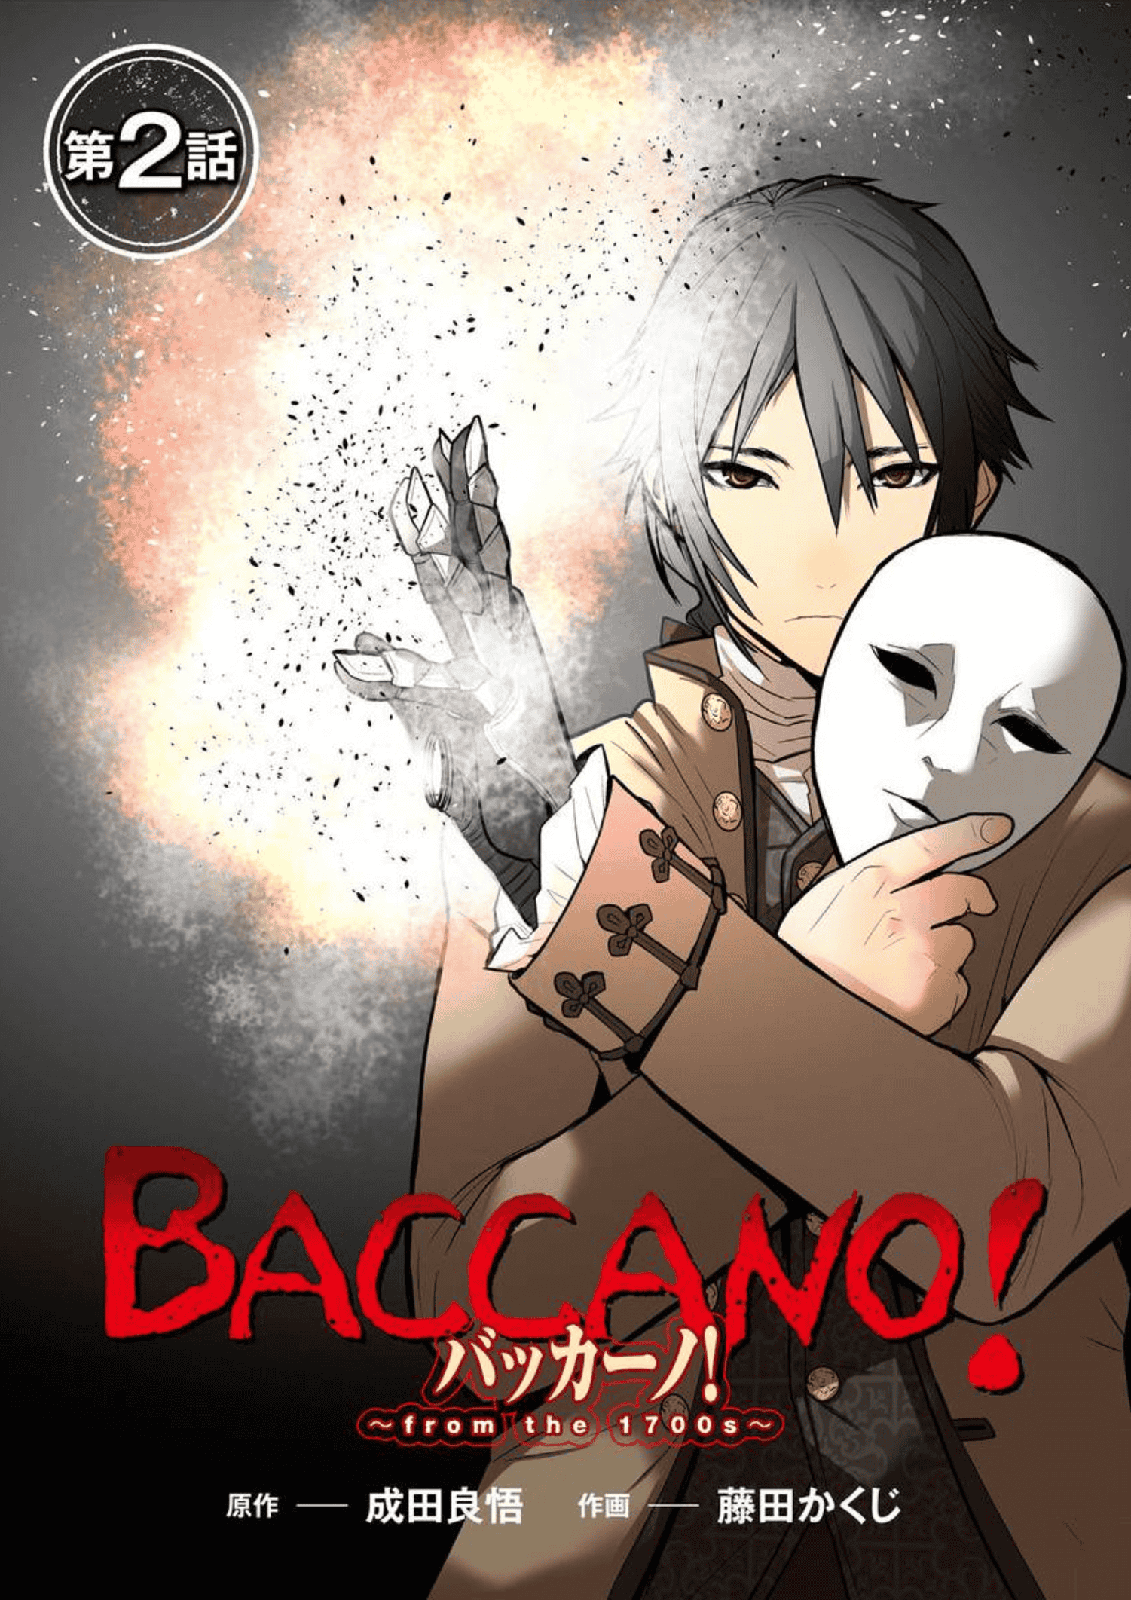 BACCANO! 永生之酒！~from the 1700s~ - 第02話 - 1